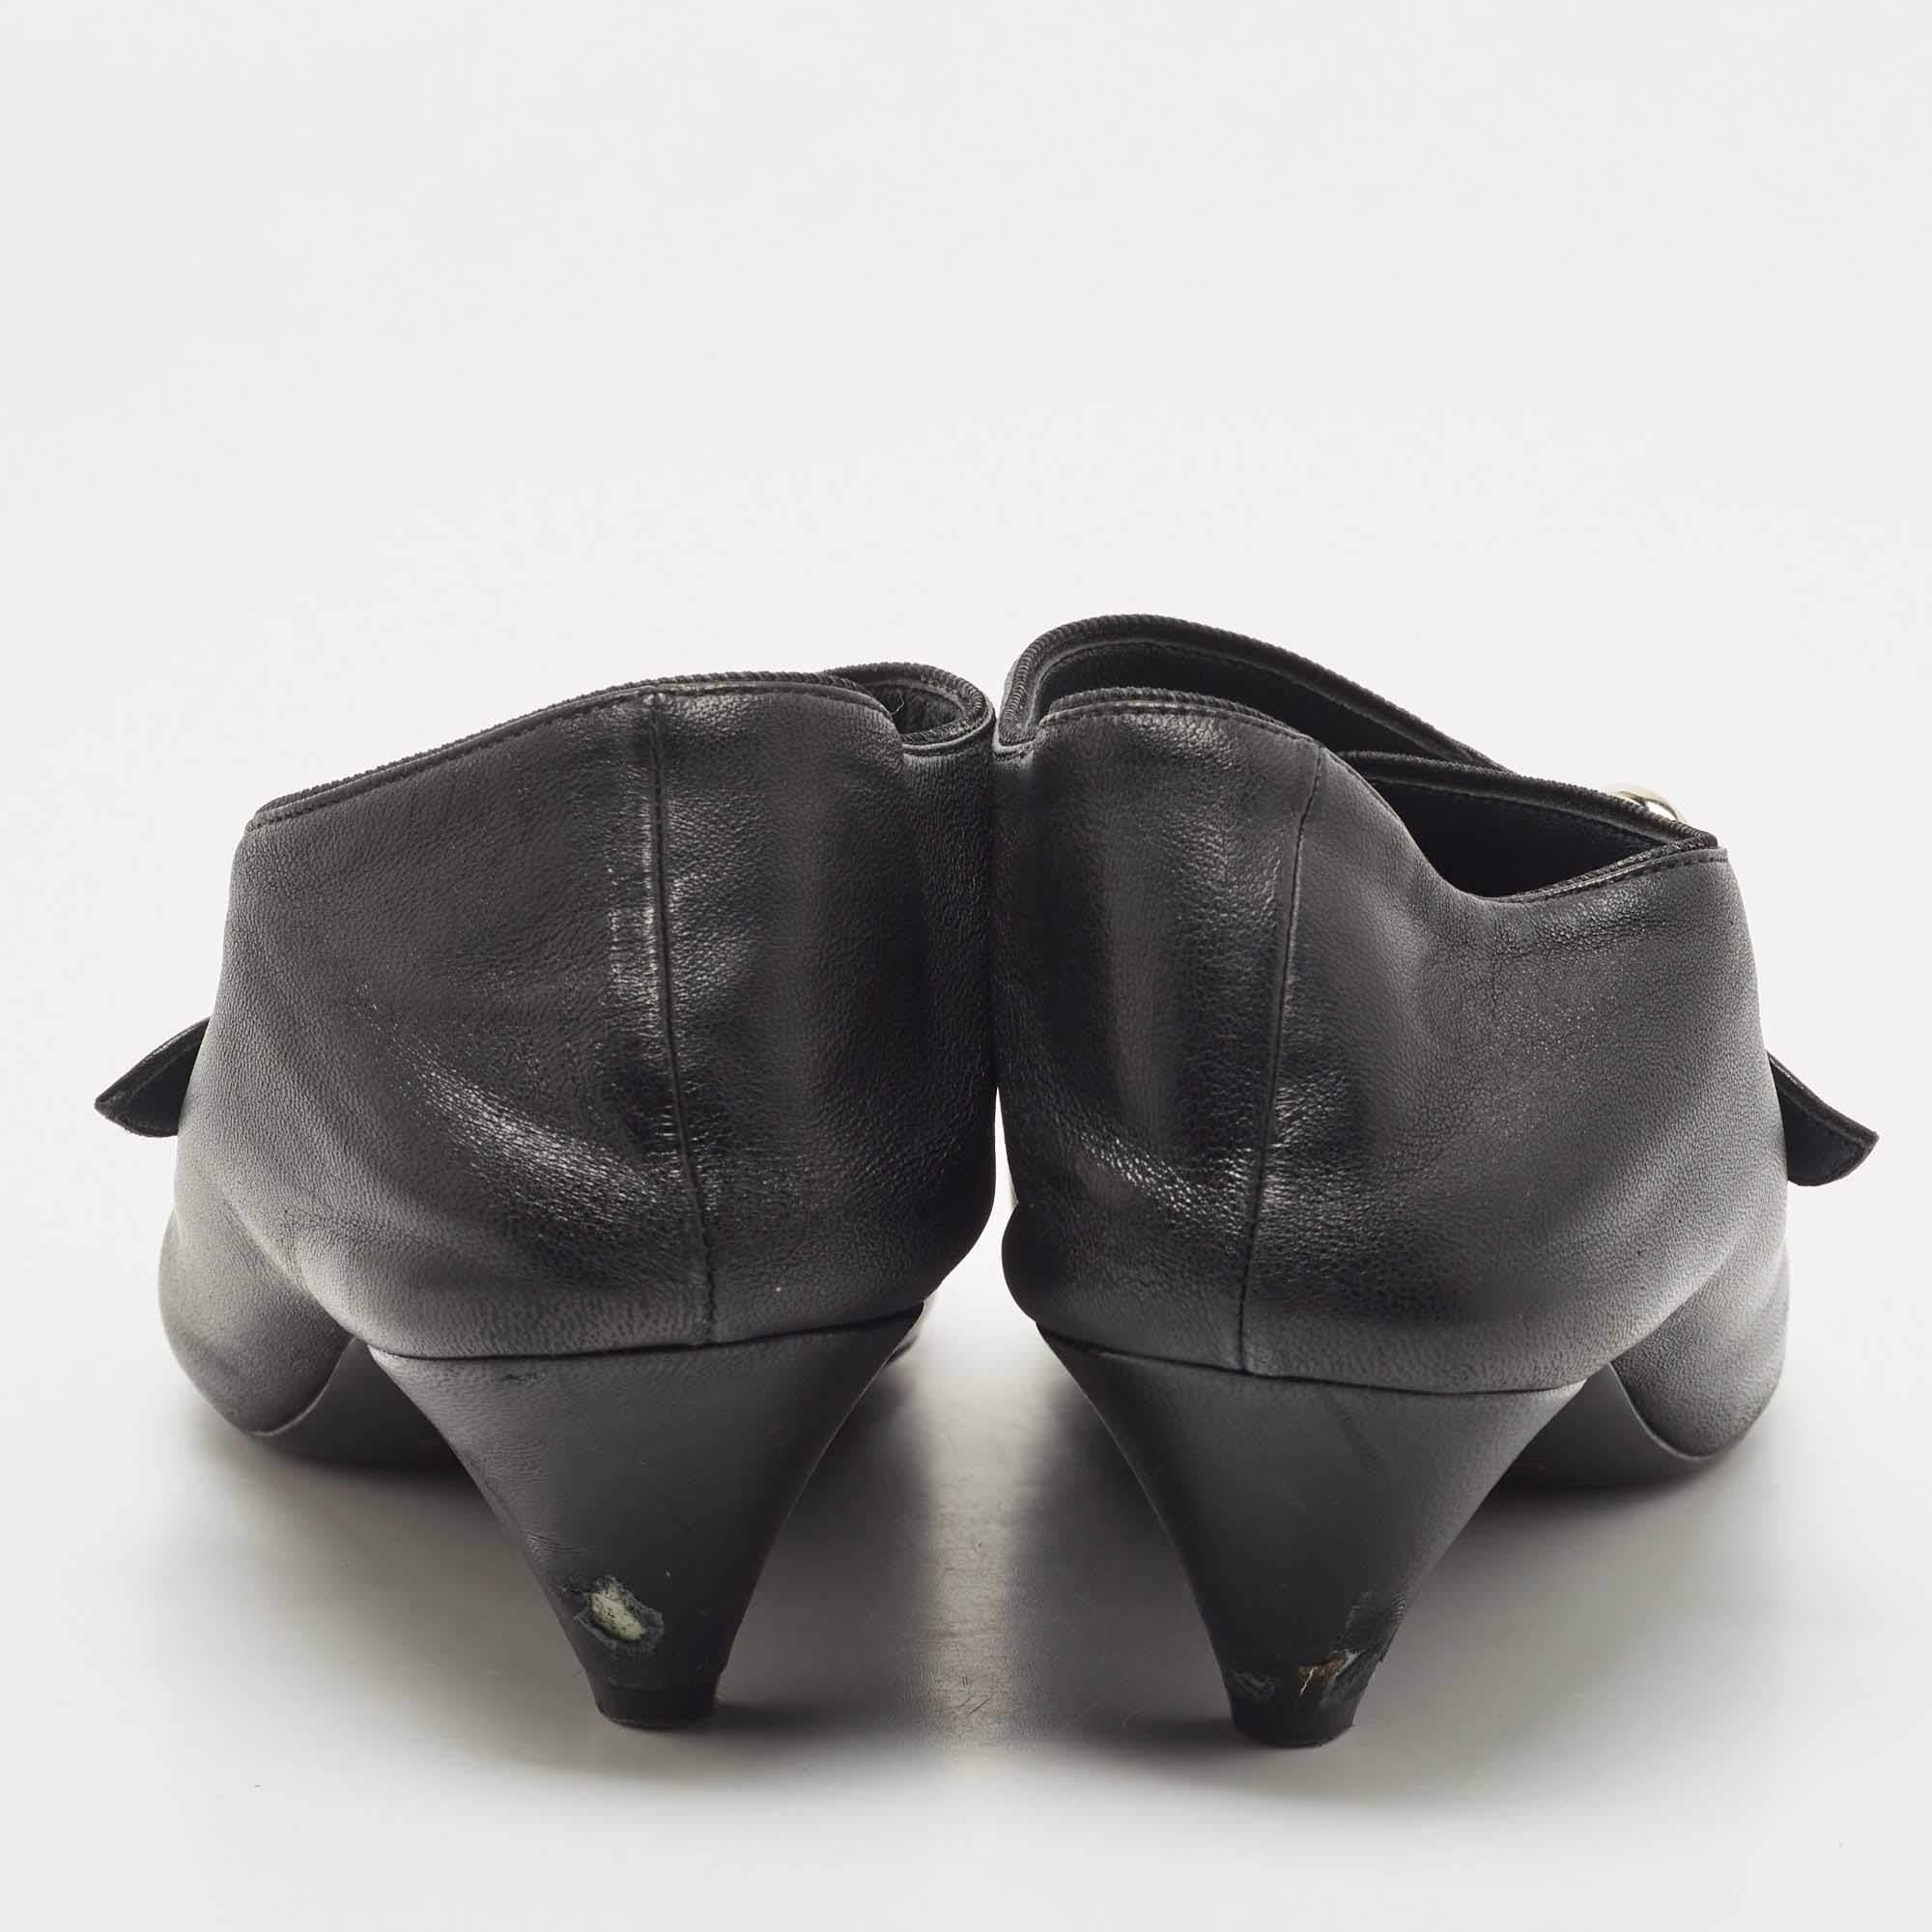 Celine Black Leather Buckle Detail Pointed Toe Booties Size 36 In Good Condition For Sale In Dubai, Al Qouz 2